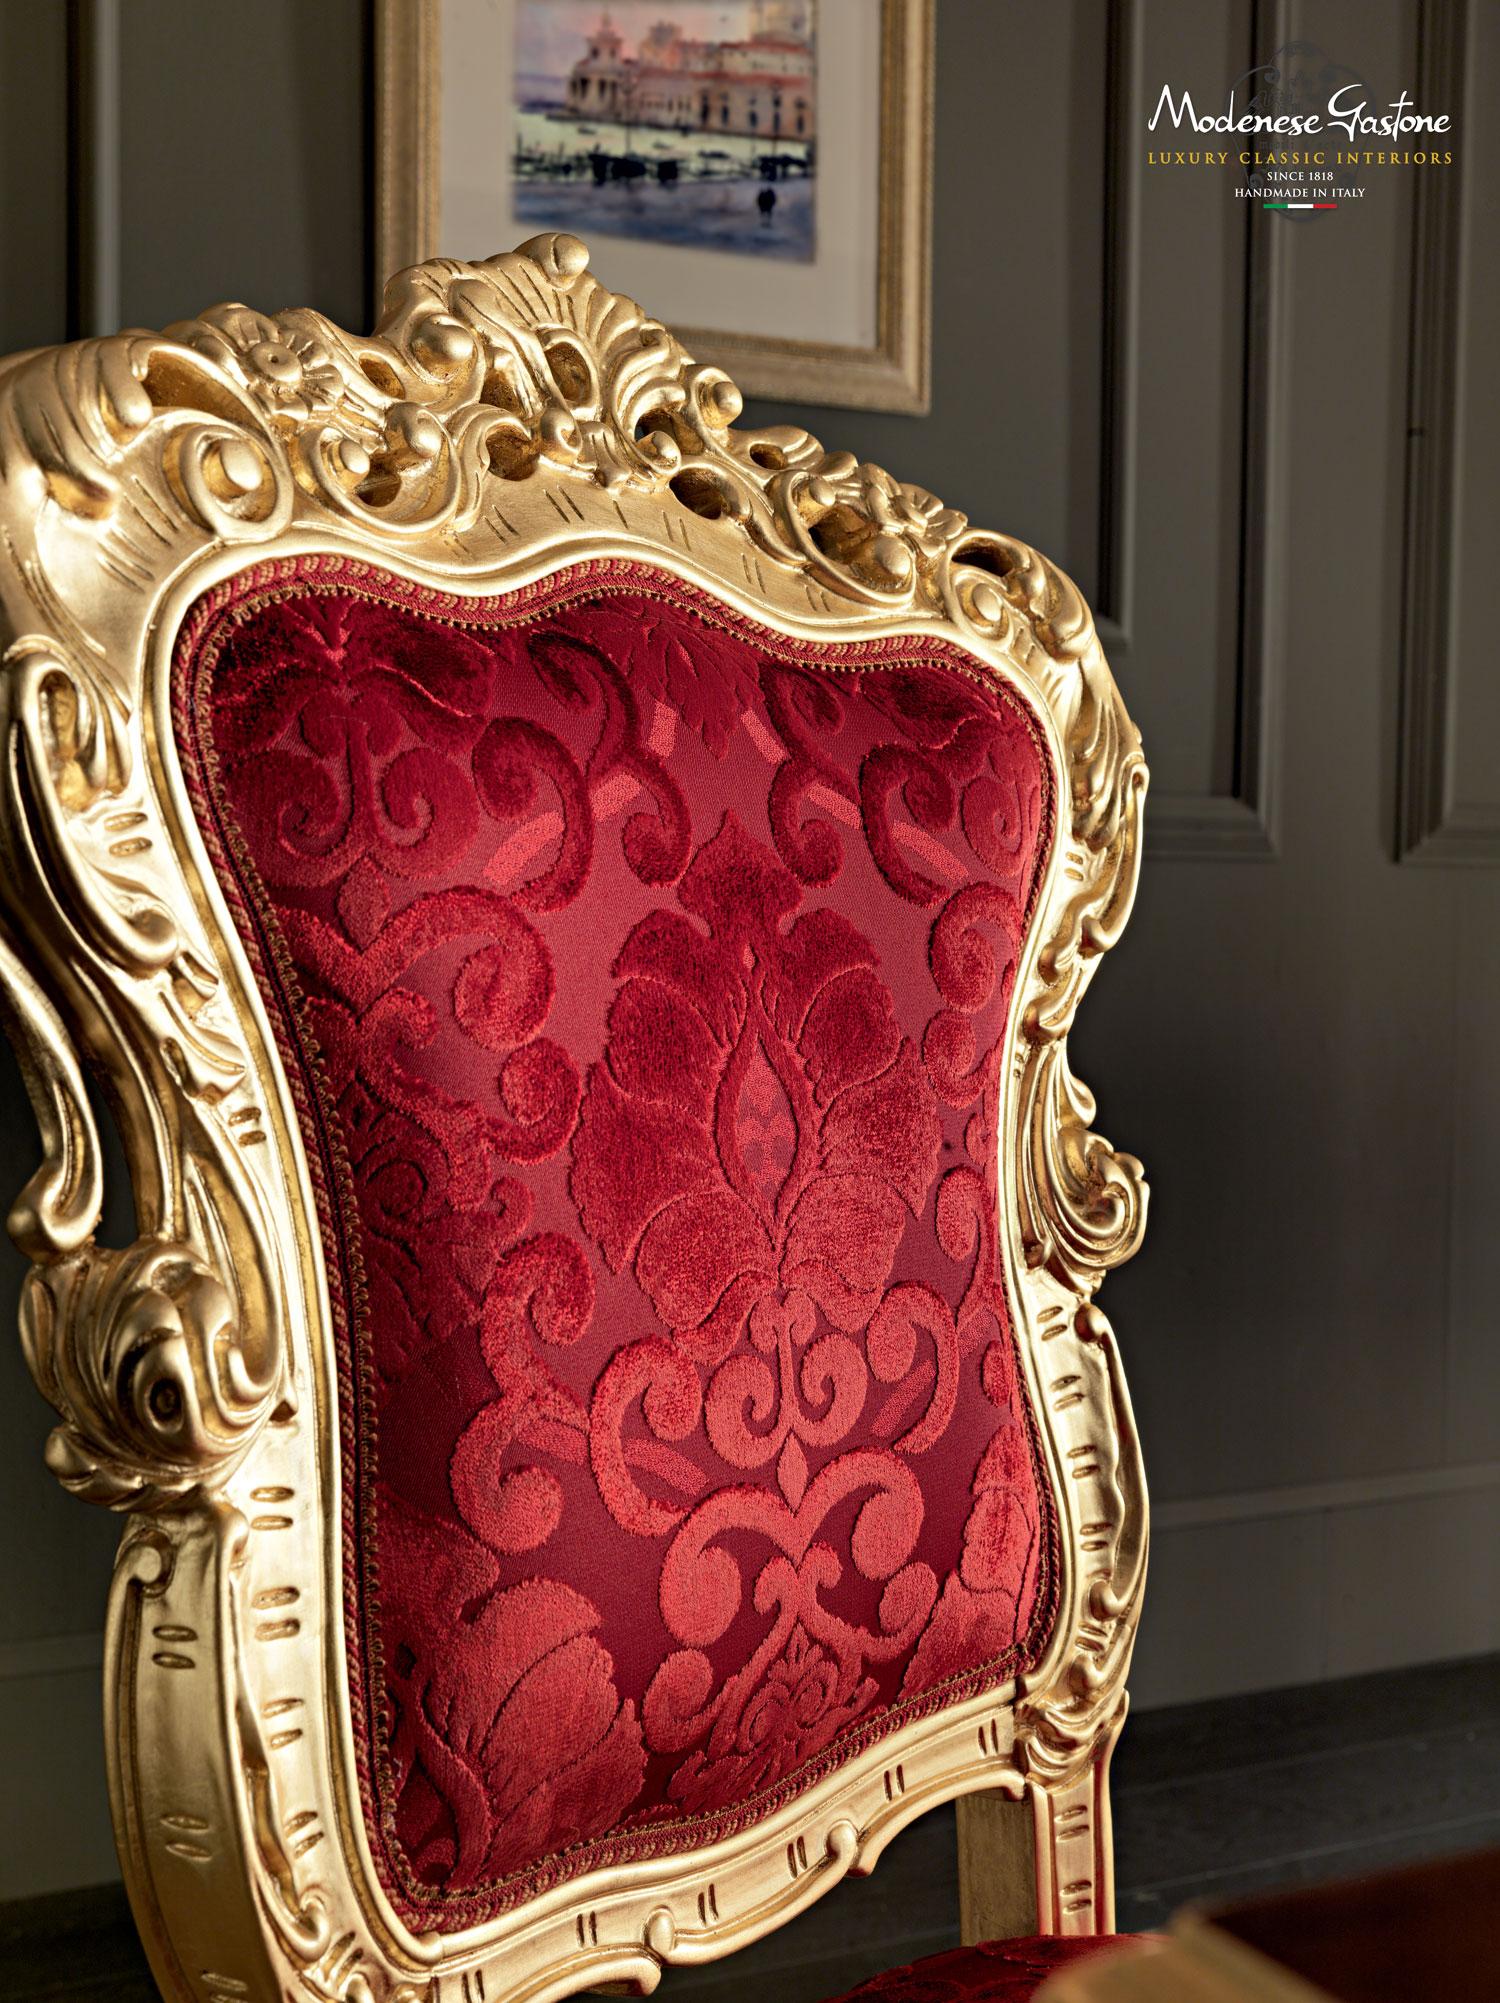 Specially designed dining chair by Modenese Luxury Interiors take on a true baroque style. This wonderful chair is a great head turner piece in any living space with its flamboyant red damascus upholstery being highlighted by the solid walnut curved